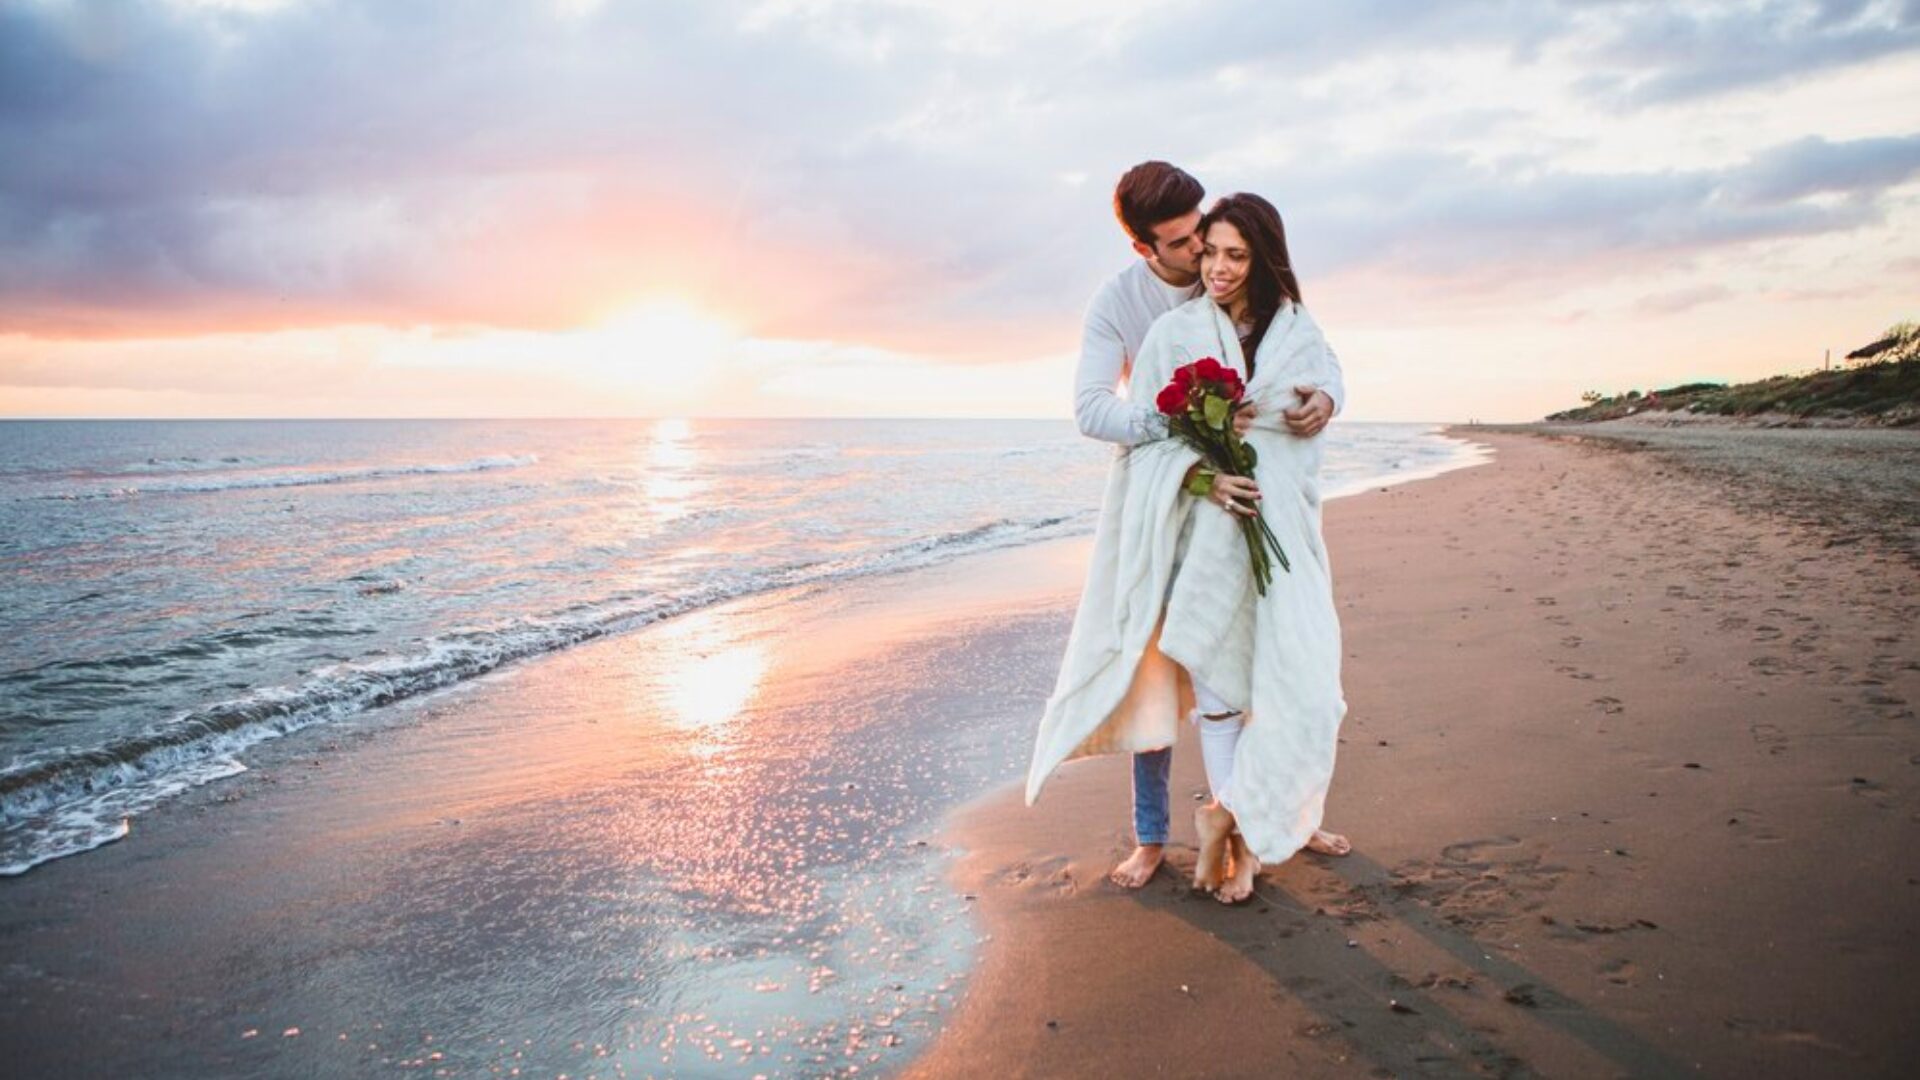 proposal malaysia couple event planning proposal planning when should I propose to my girlfriend valentine's day what should I prepare for proposal